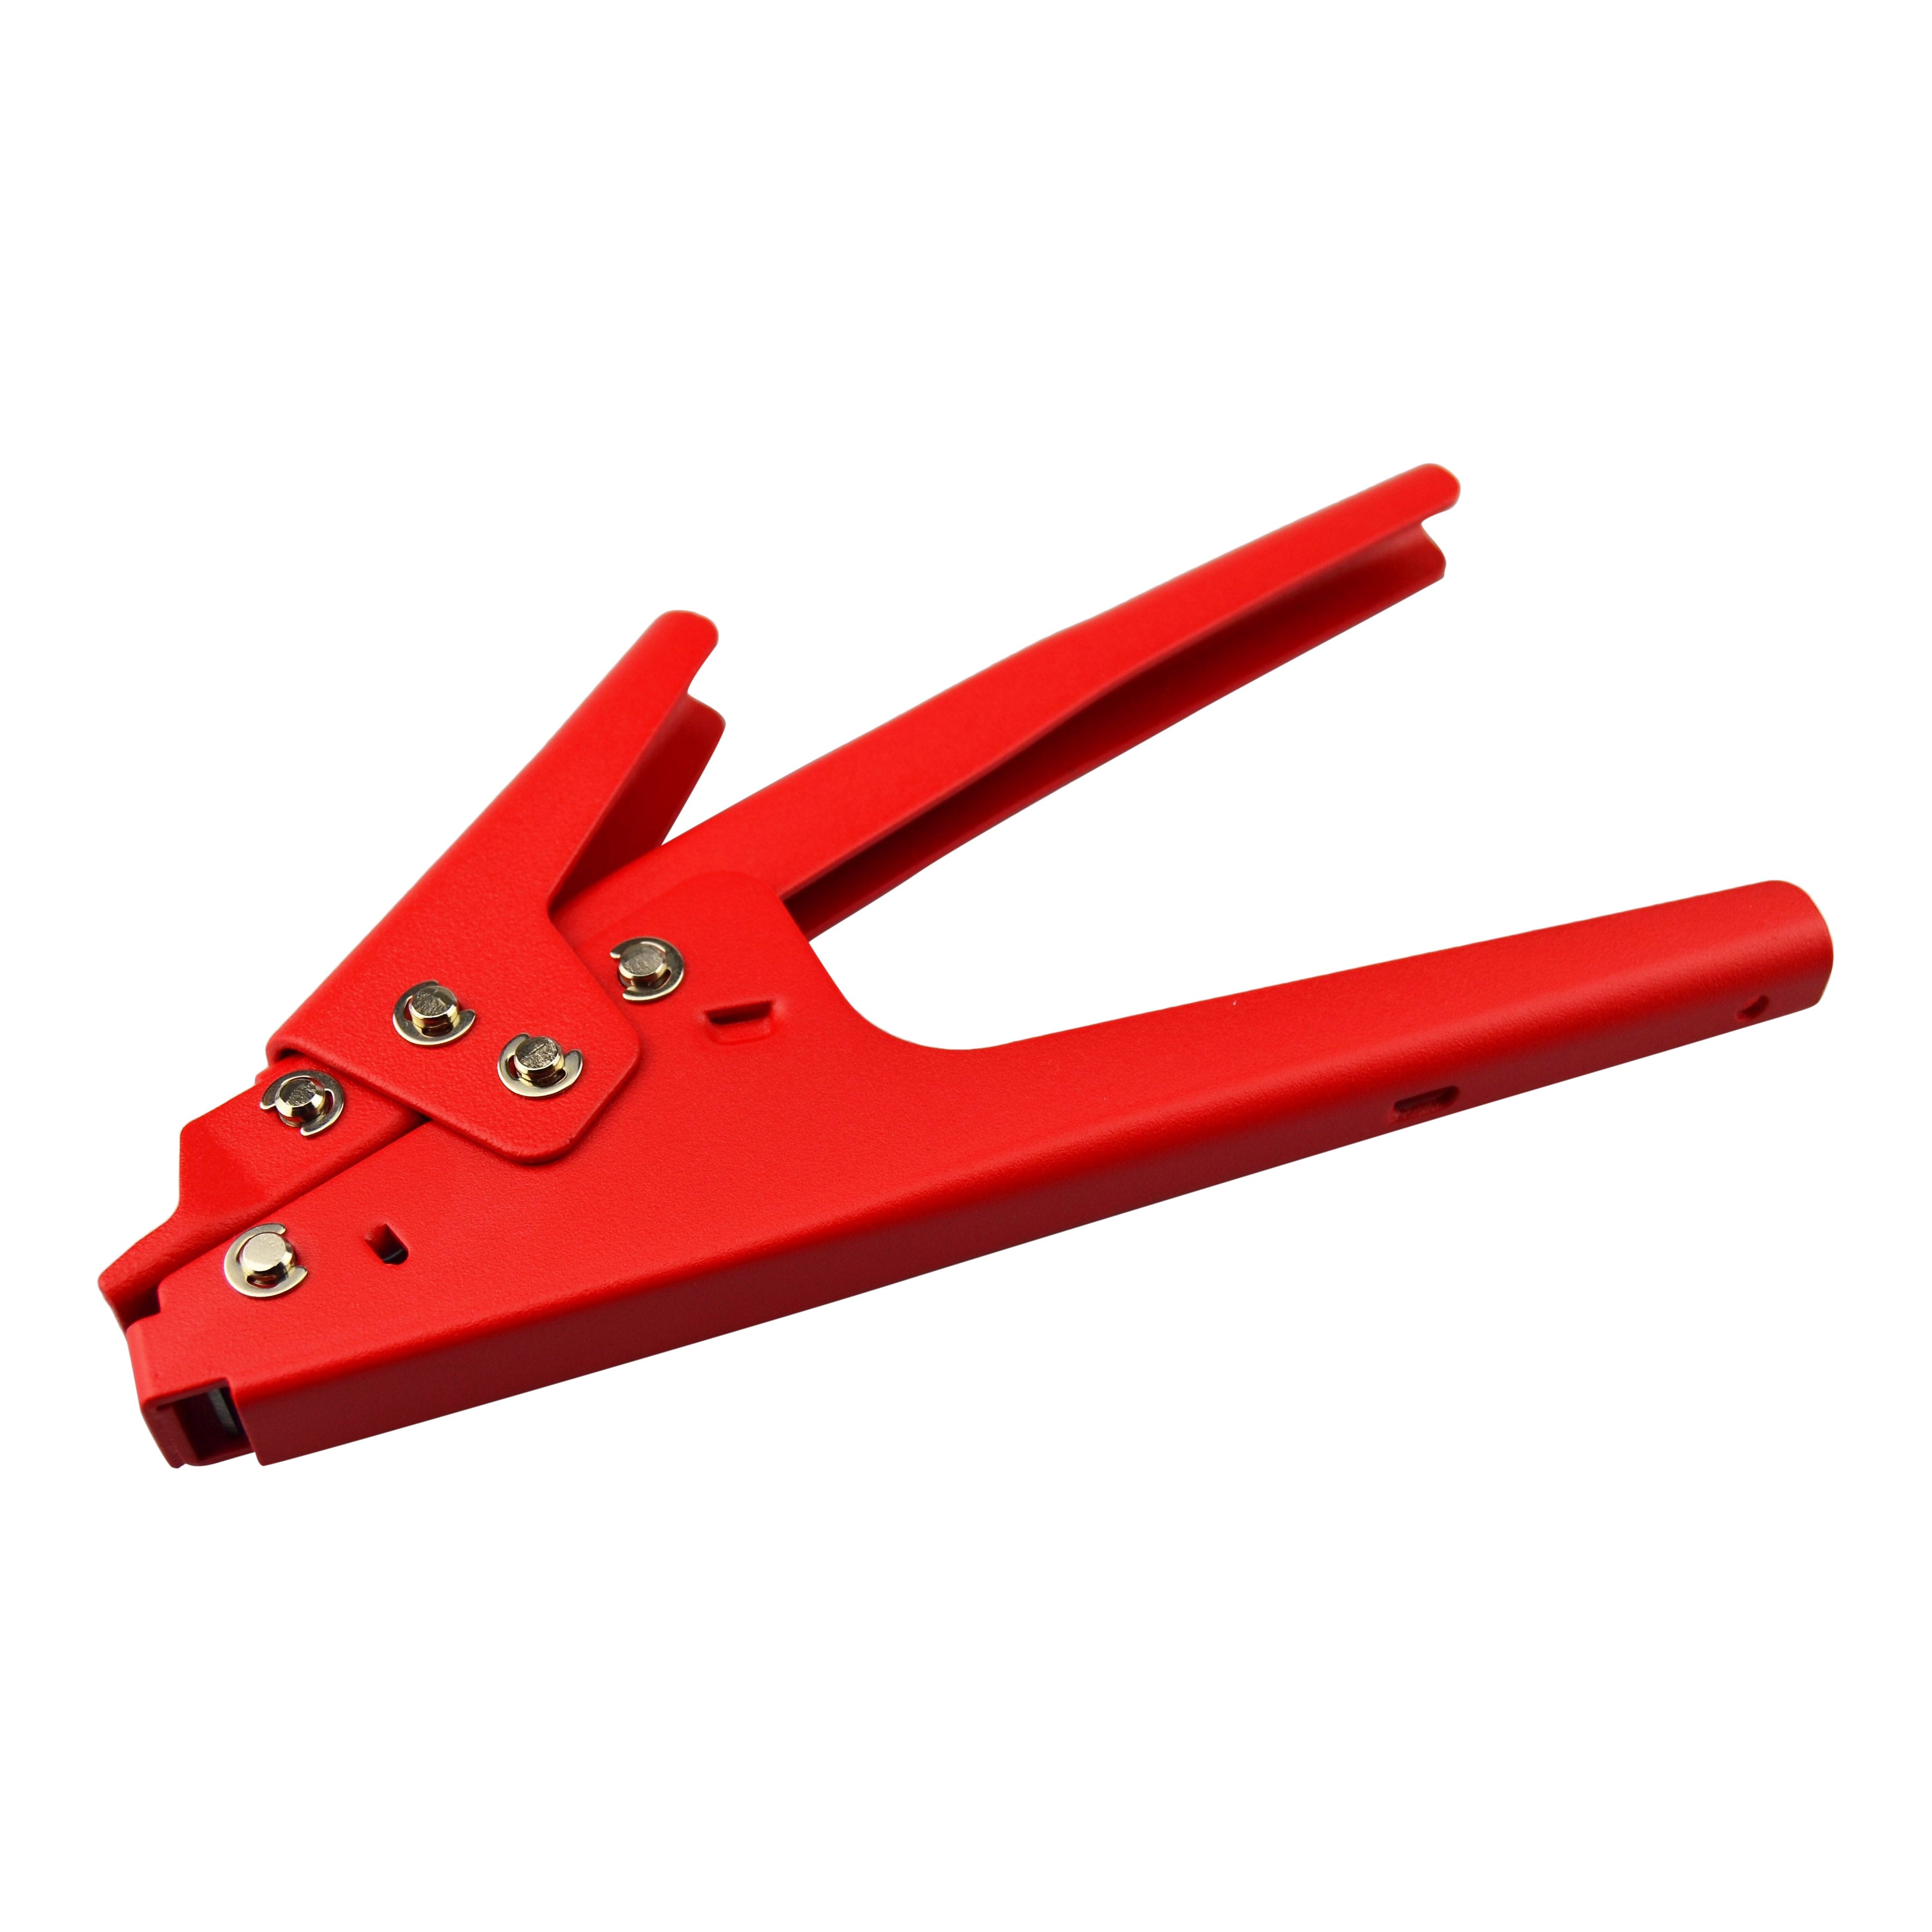 Manual Cable Tie Installation Tool to Suit Nylon Cable Ties up to 12mm Width